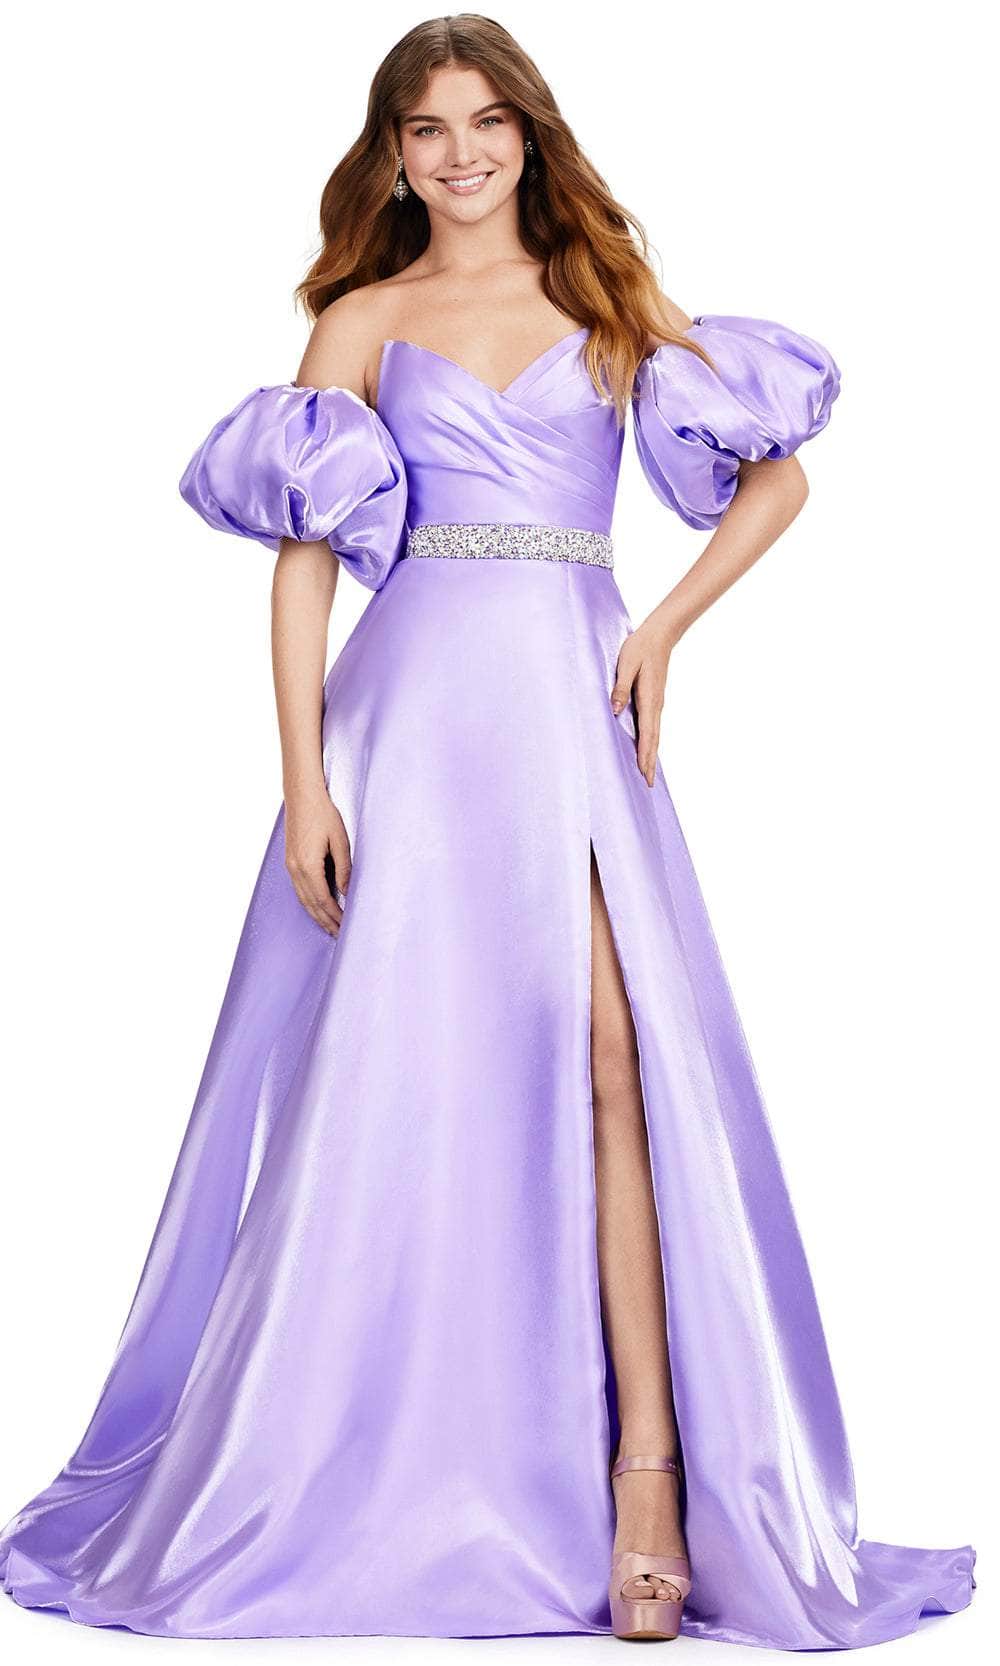 Ashley Lauren 11474 - A-Line Prom Dress with Beaded Belt 00 /  Orchid